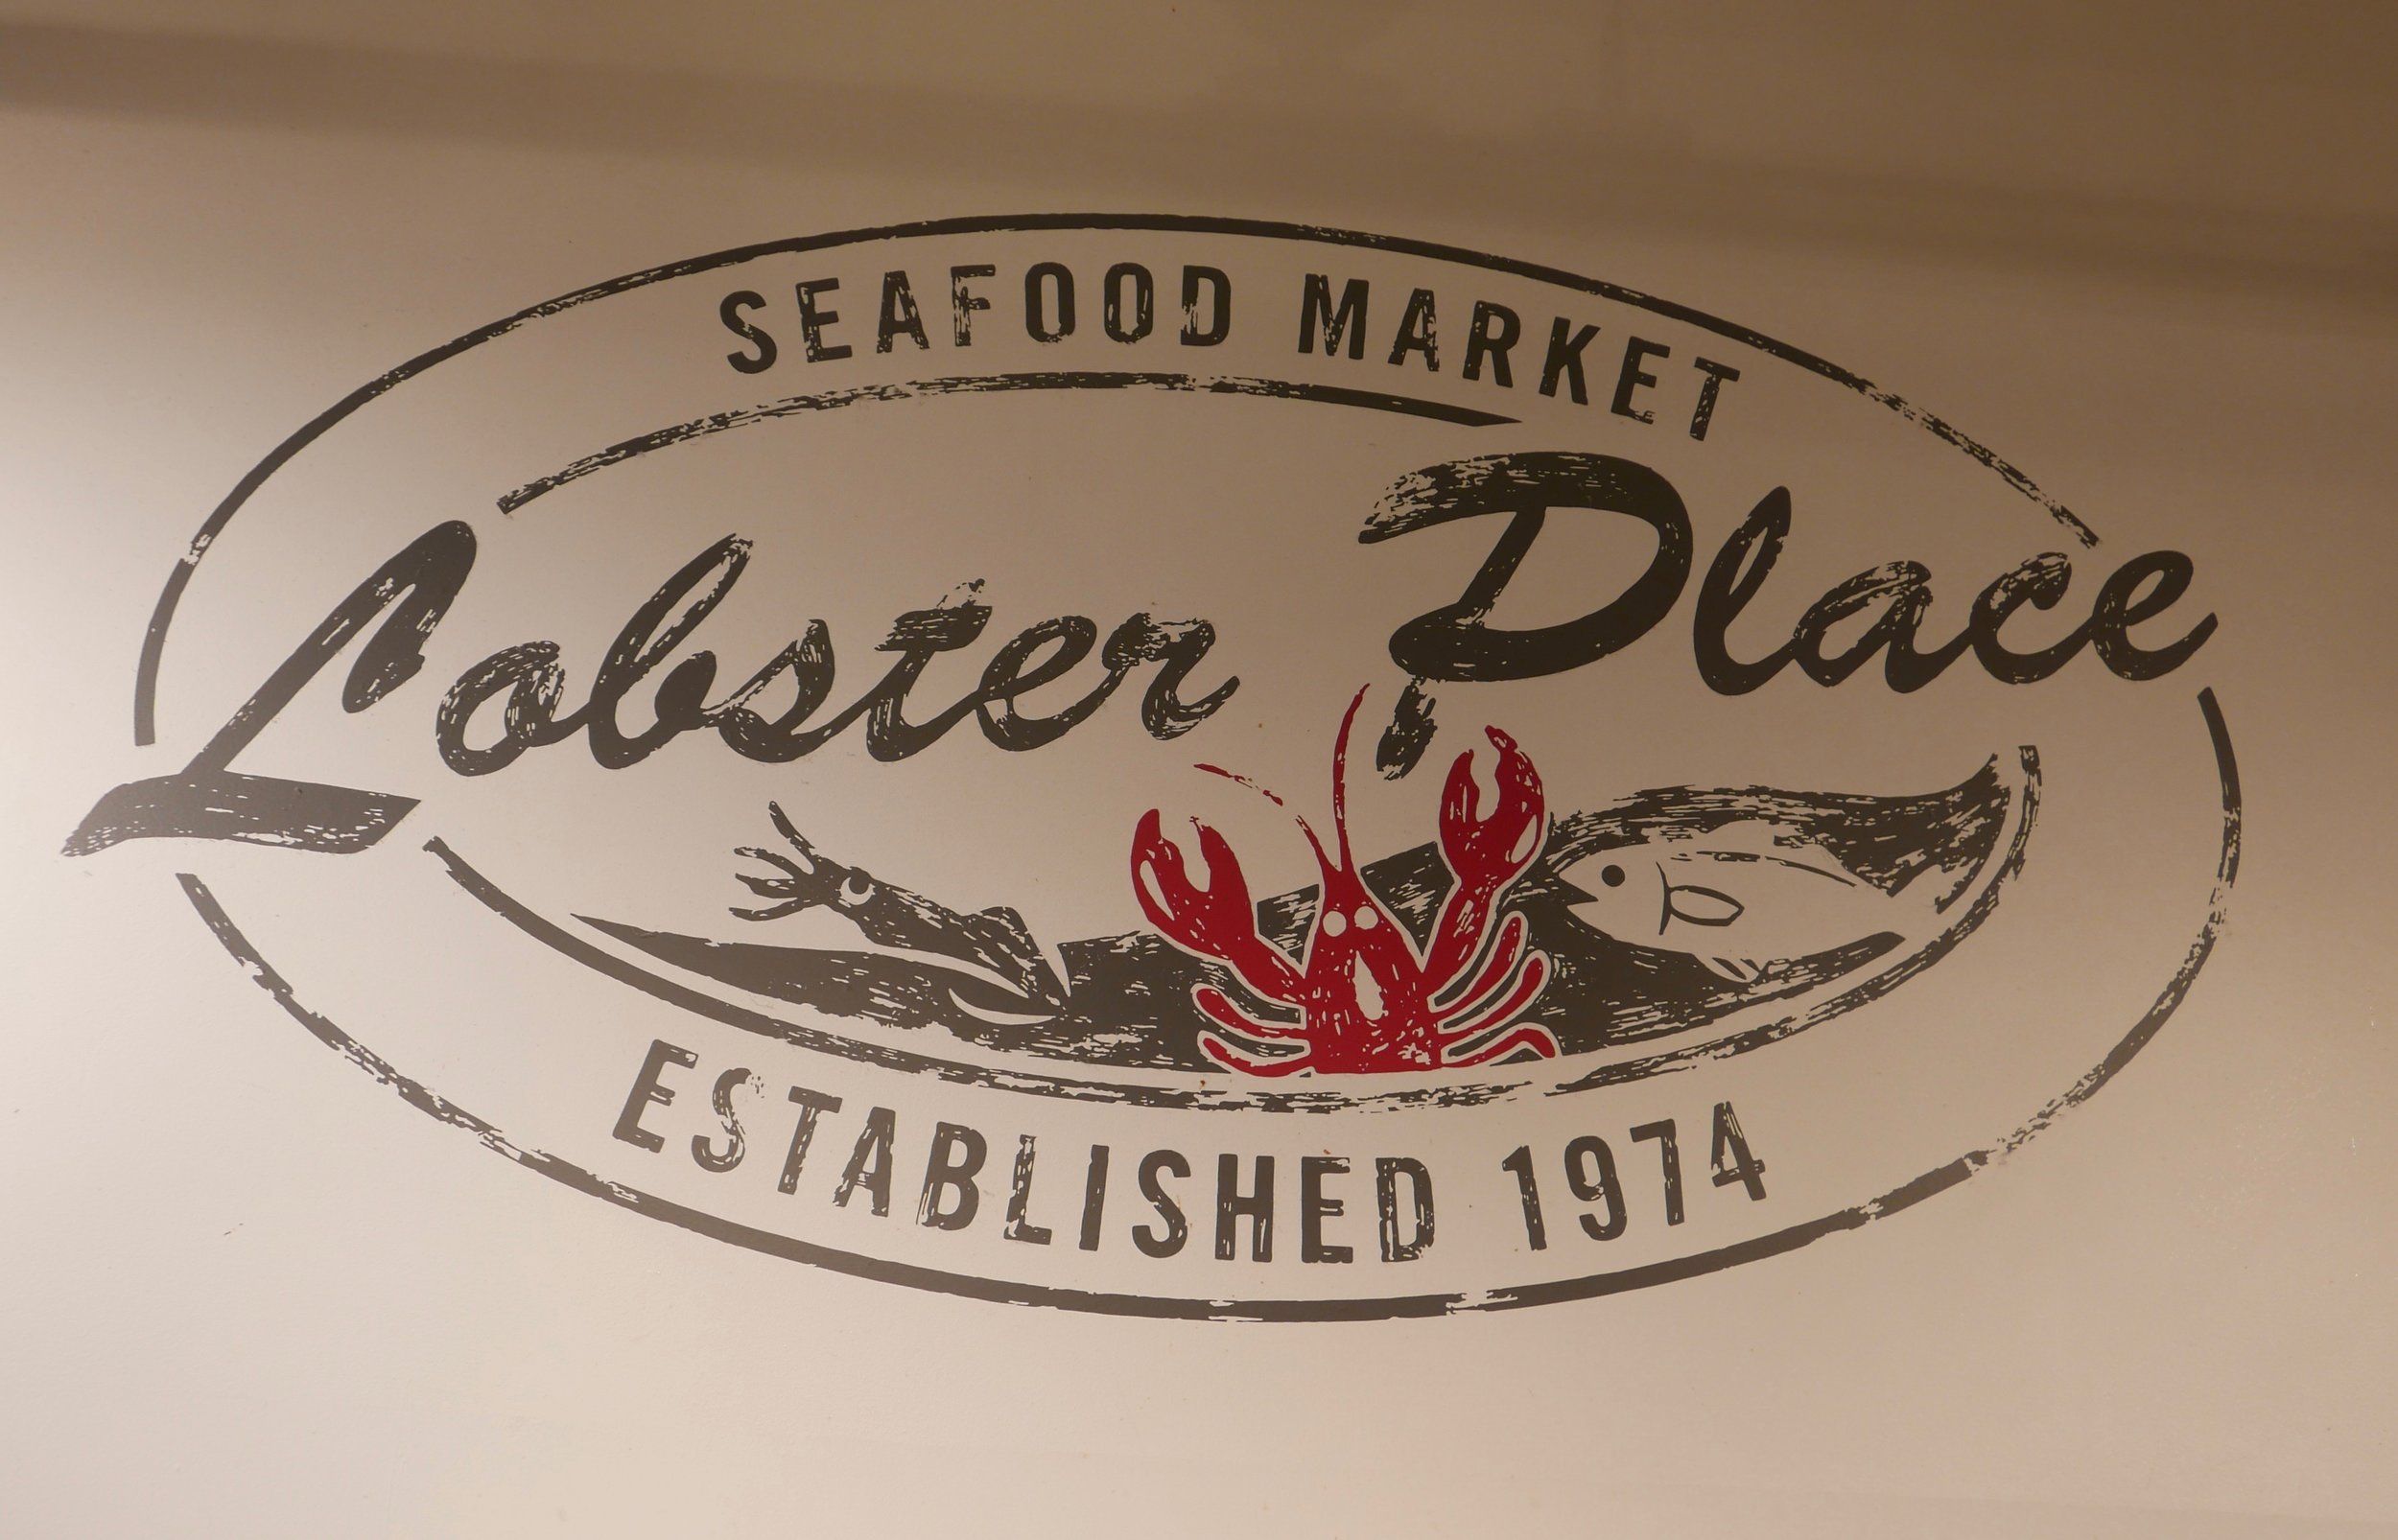 Chelsea Market - NYC Manhattan - Lobster Place